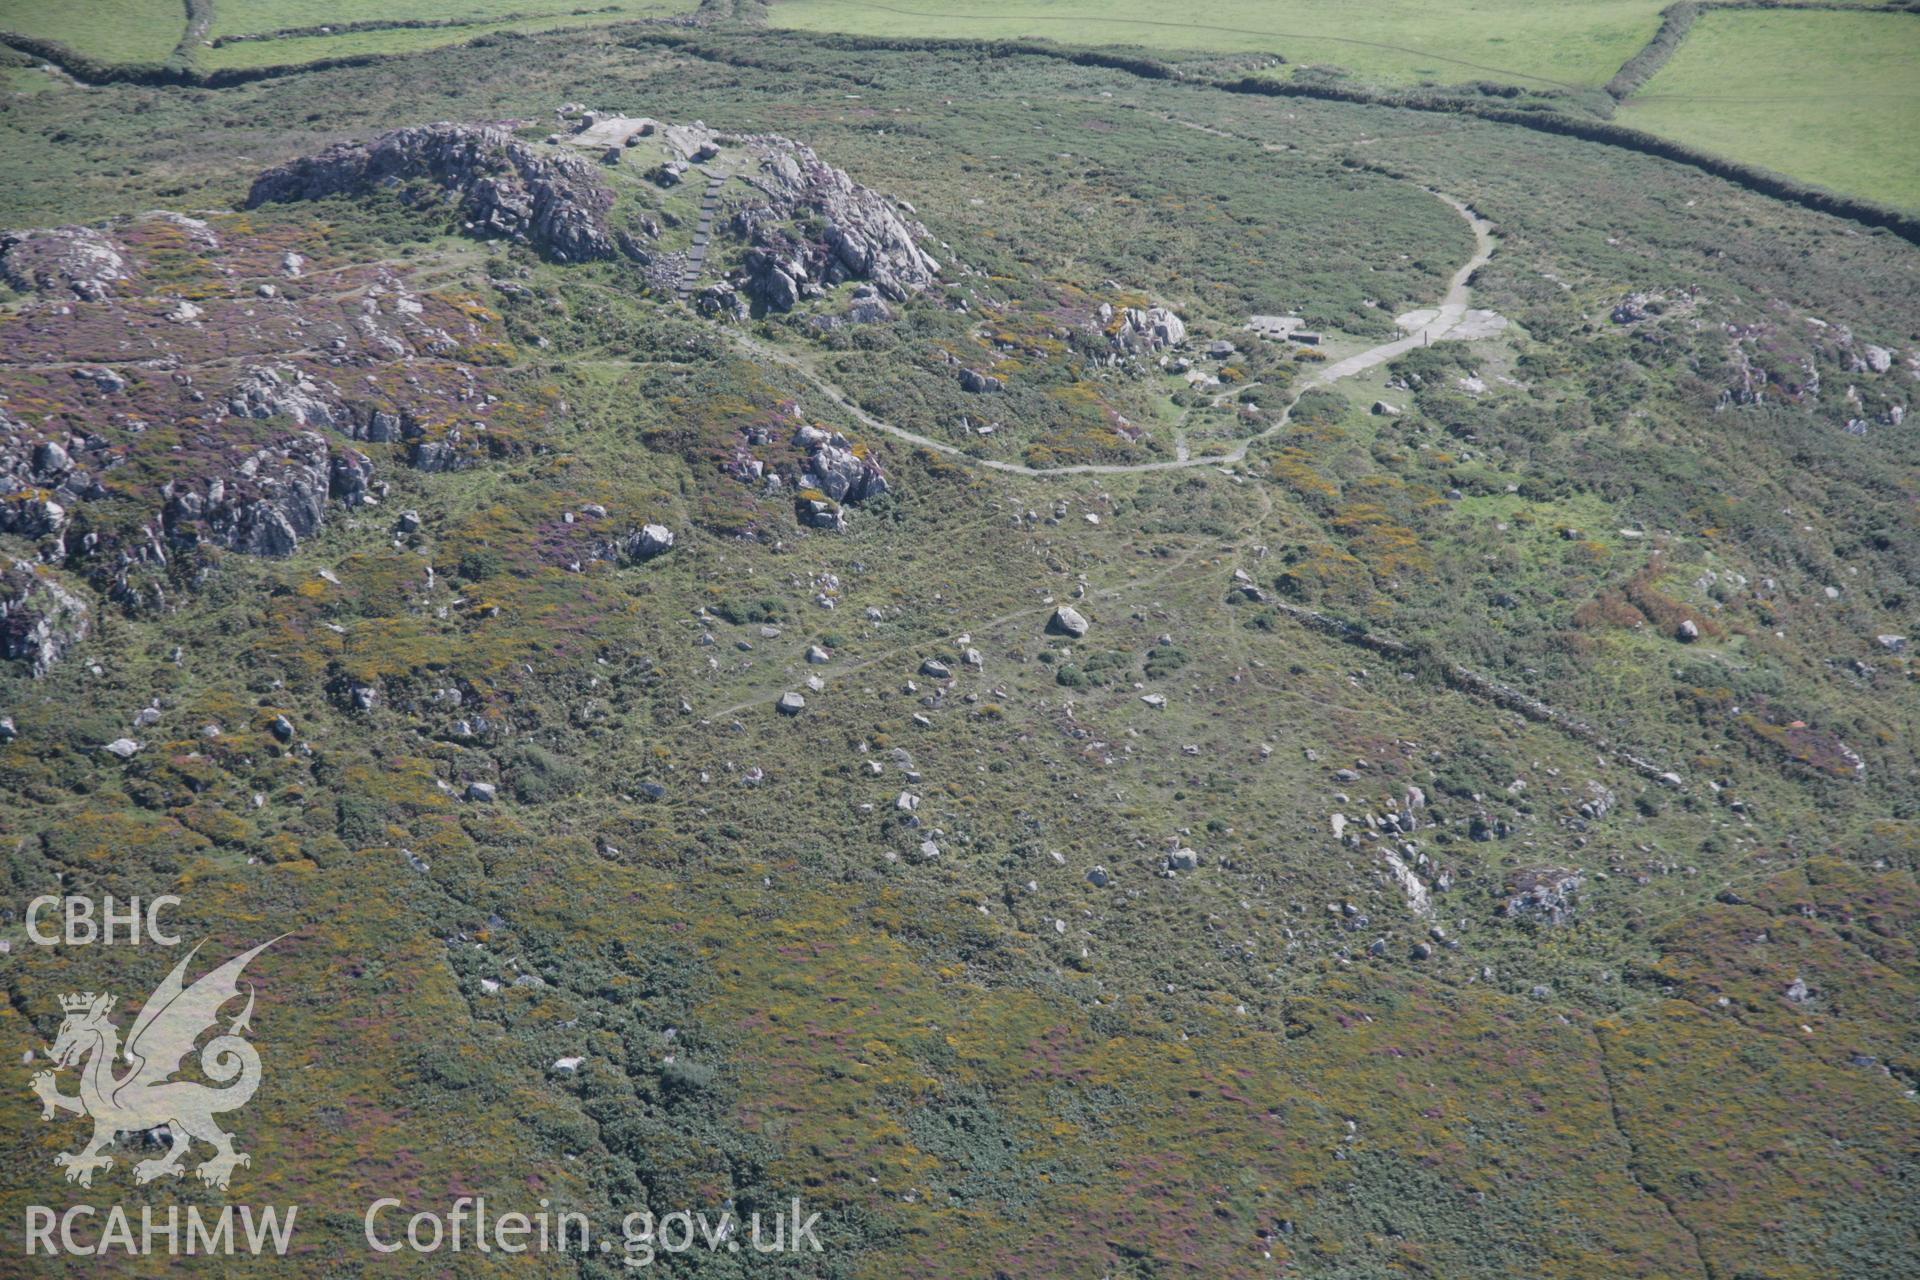 RCAHMW digital colour oblique photograph of Carn Llidi Burial Chambers viewed from the north. Taken on 01/09/2005 by T.G. Driver.